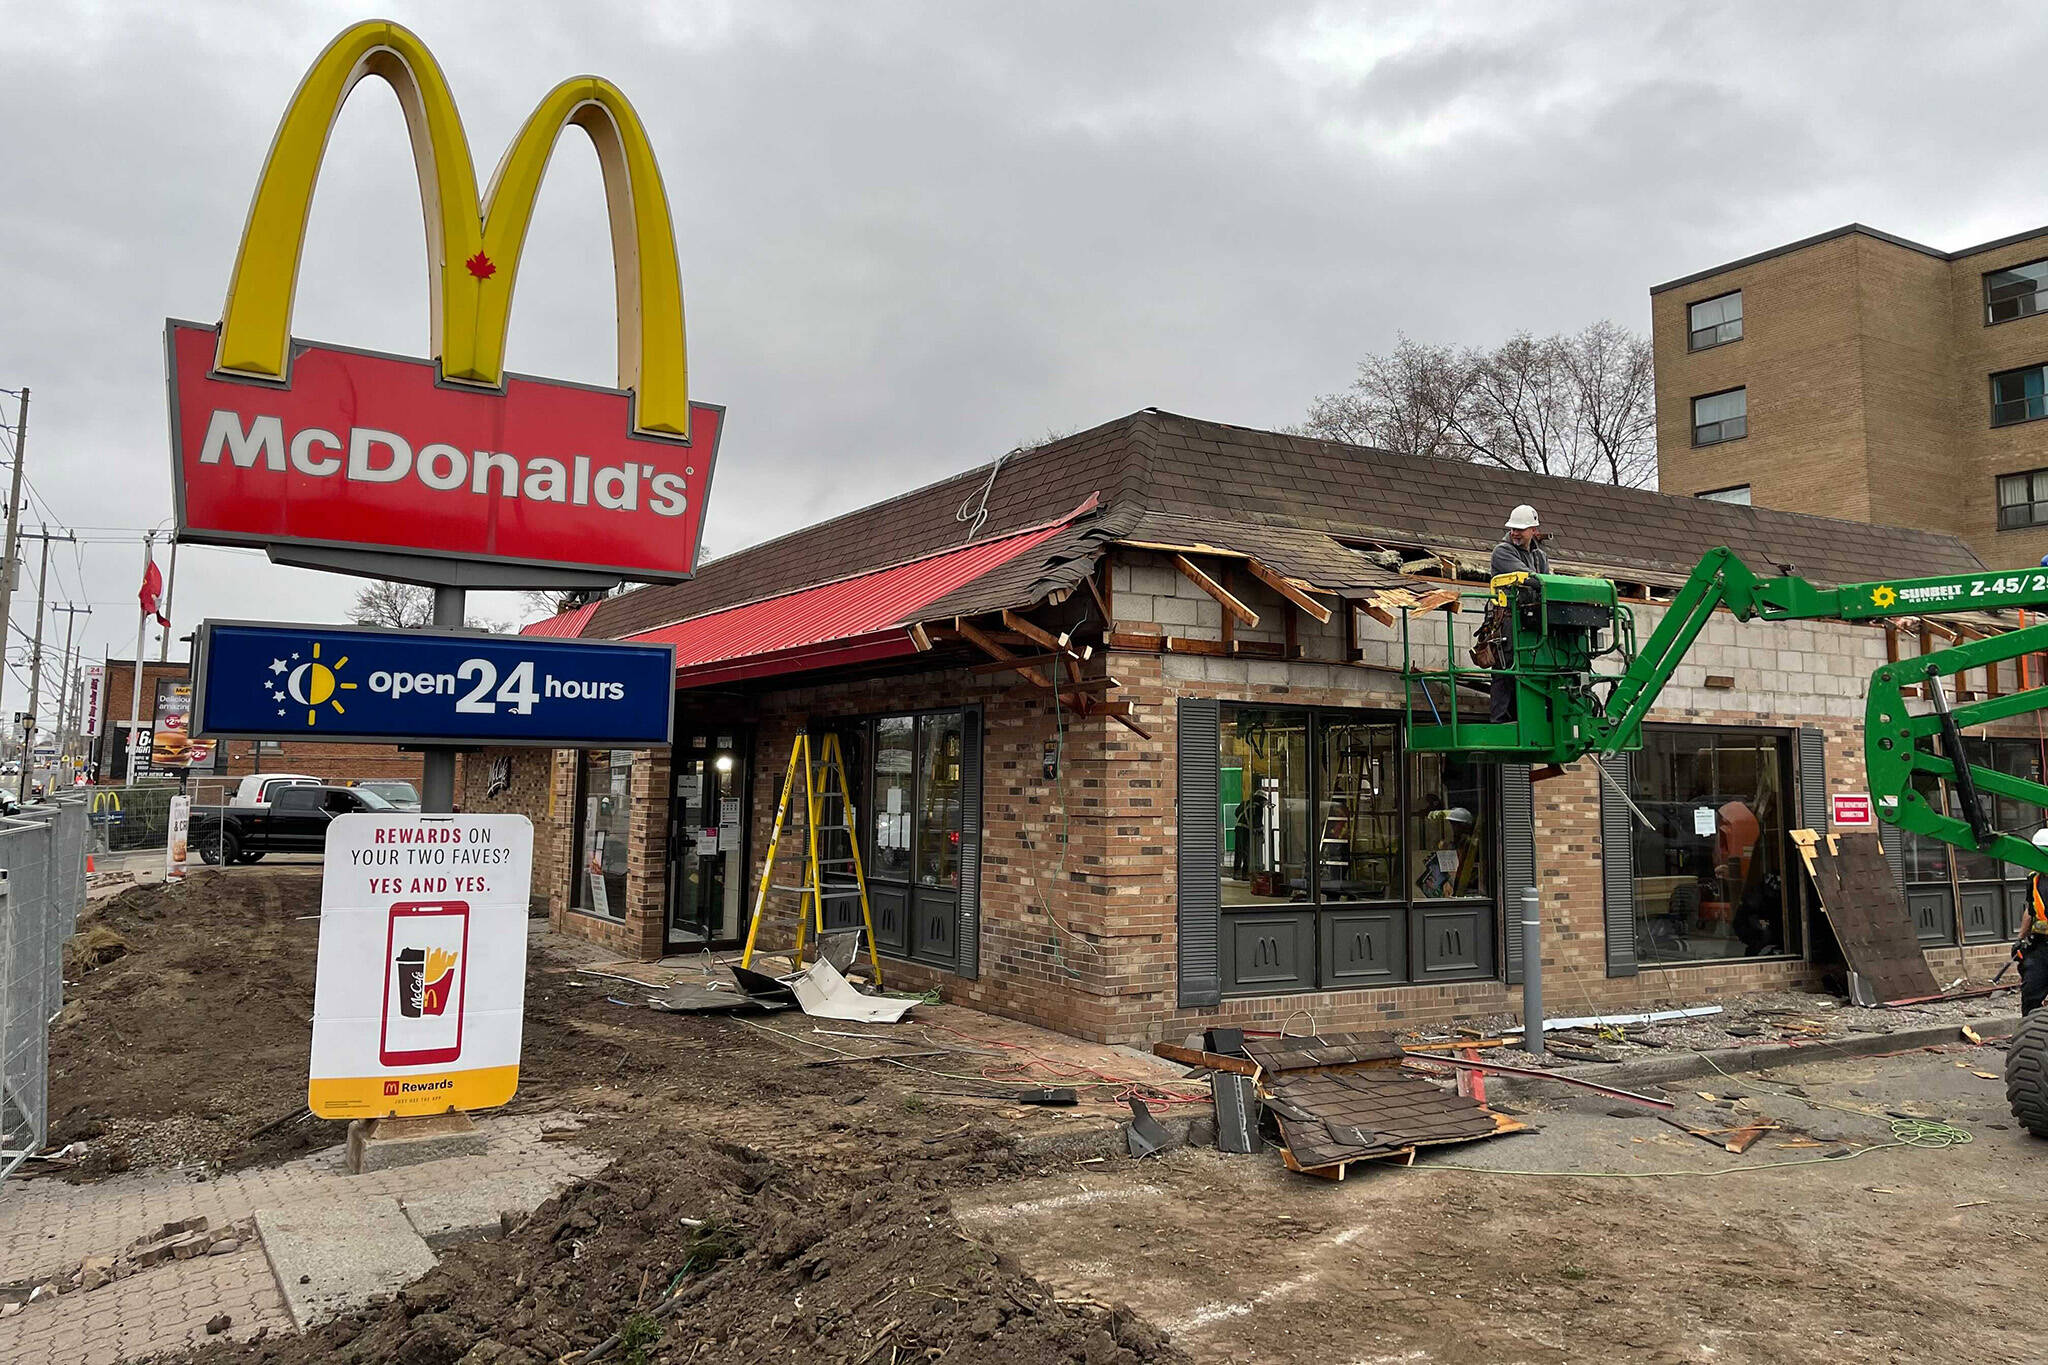 Toronto Mcdonalds Just Closed For Major Renovations And The